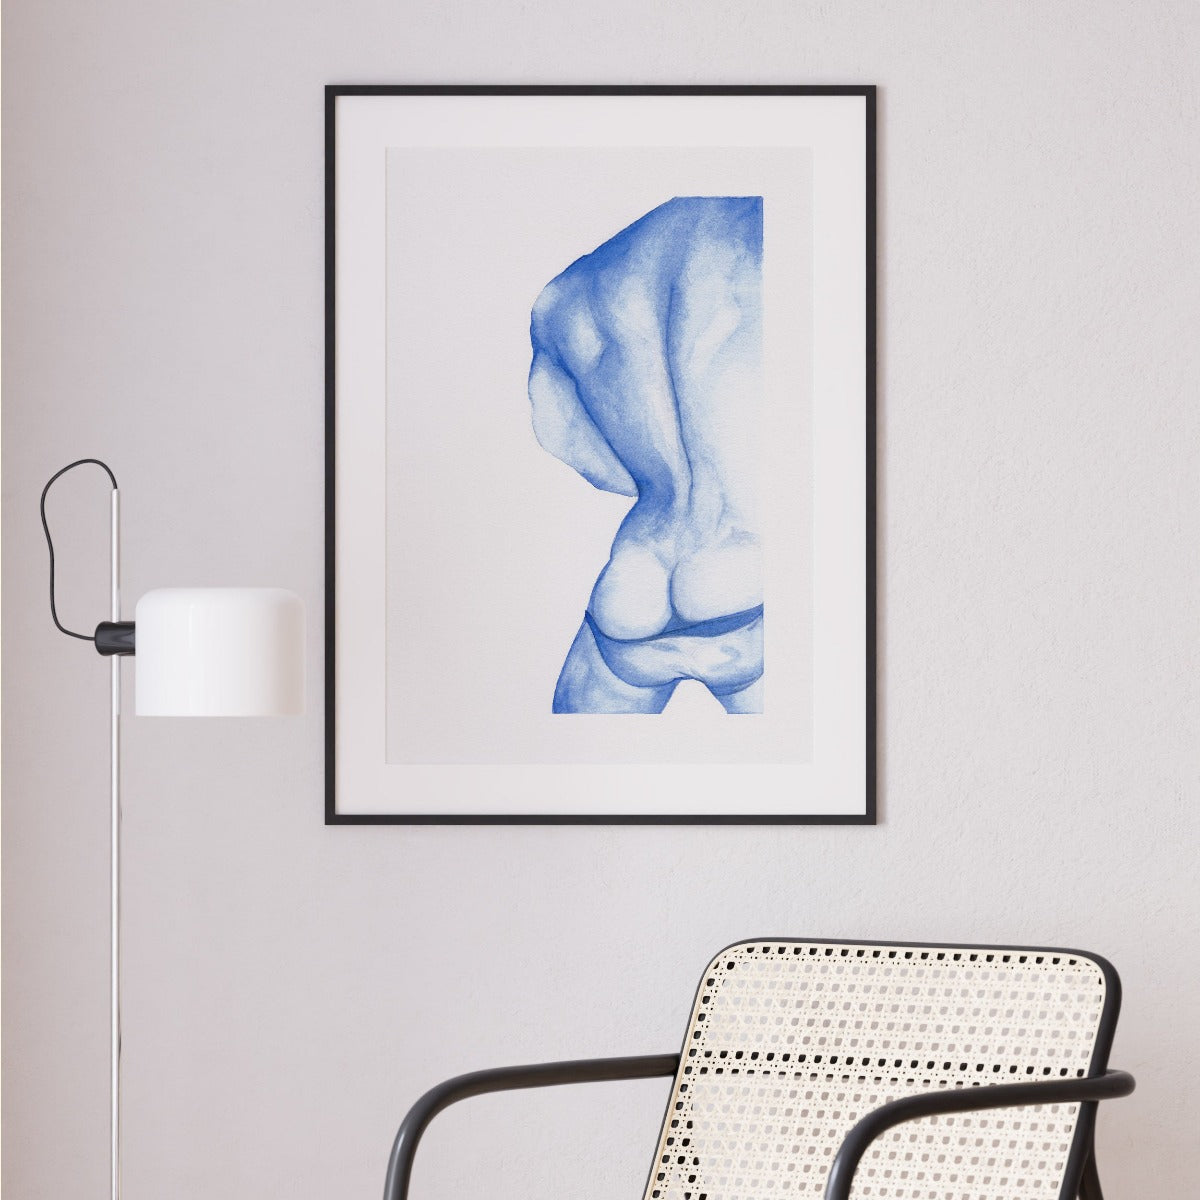 A watercolor art print featuring a nude man's back